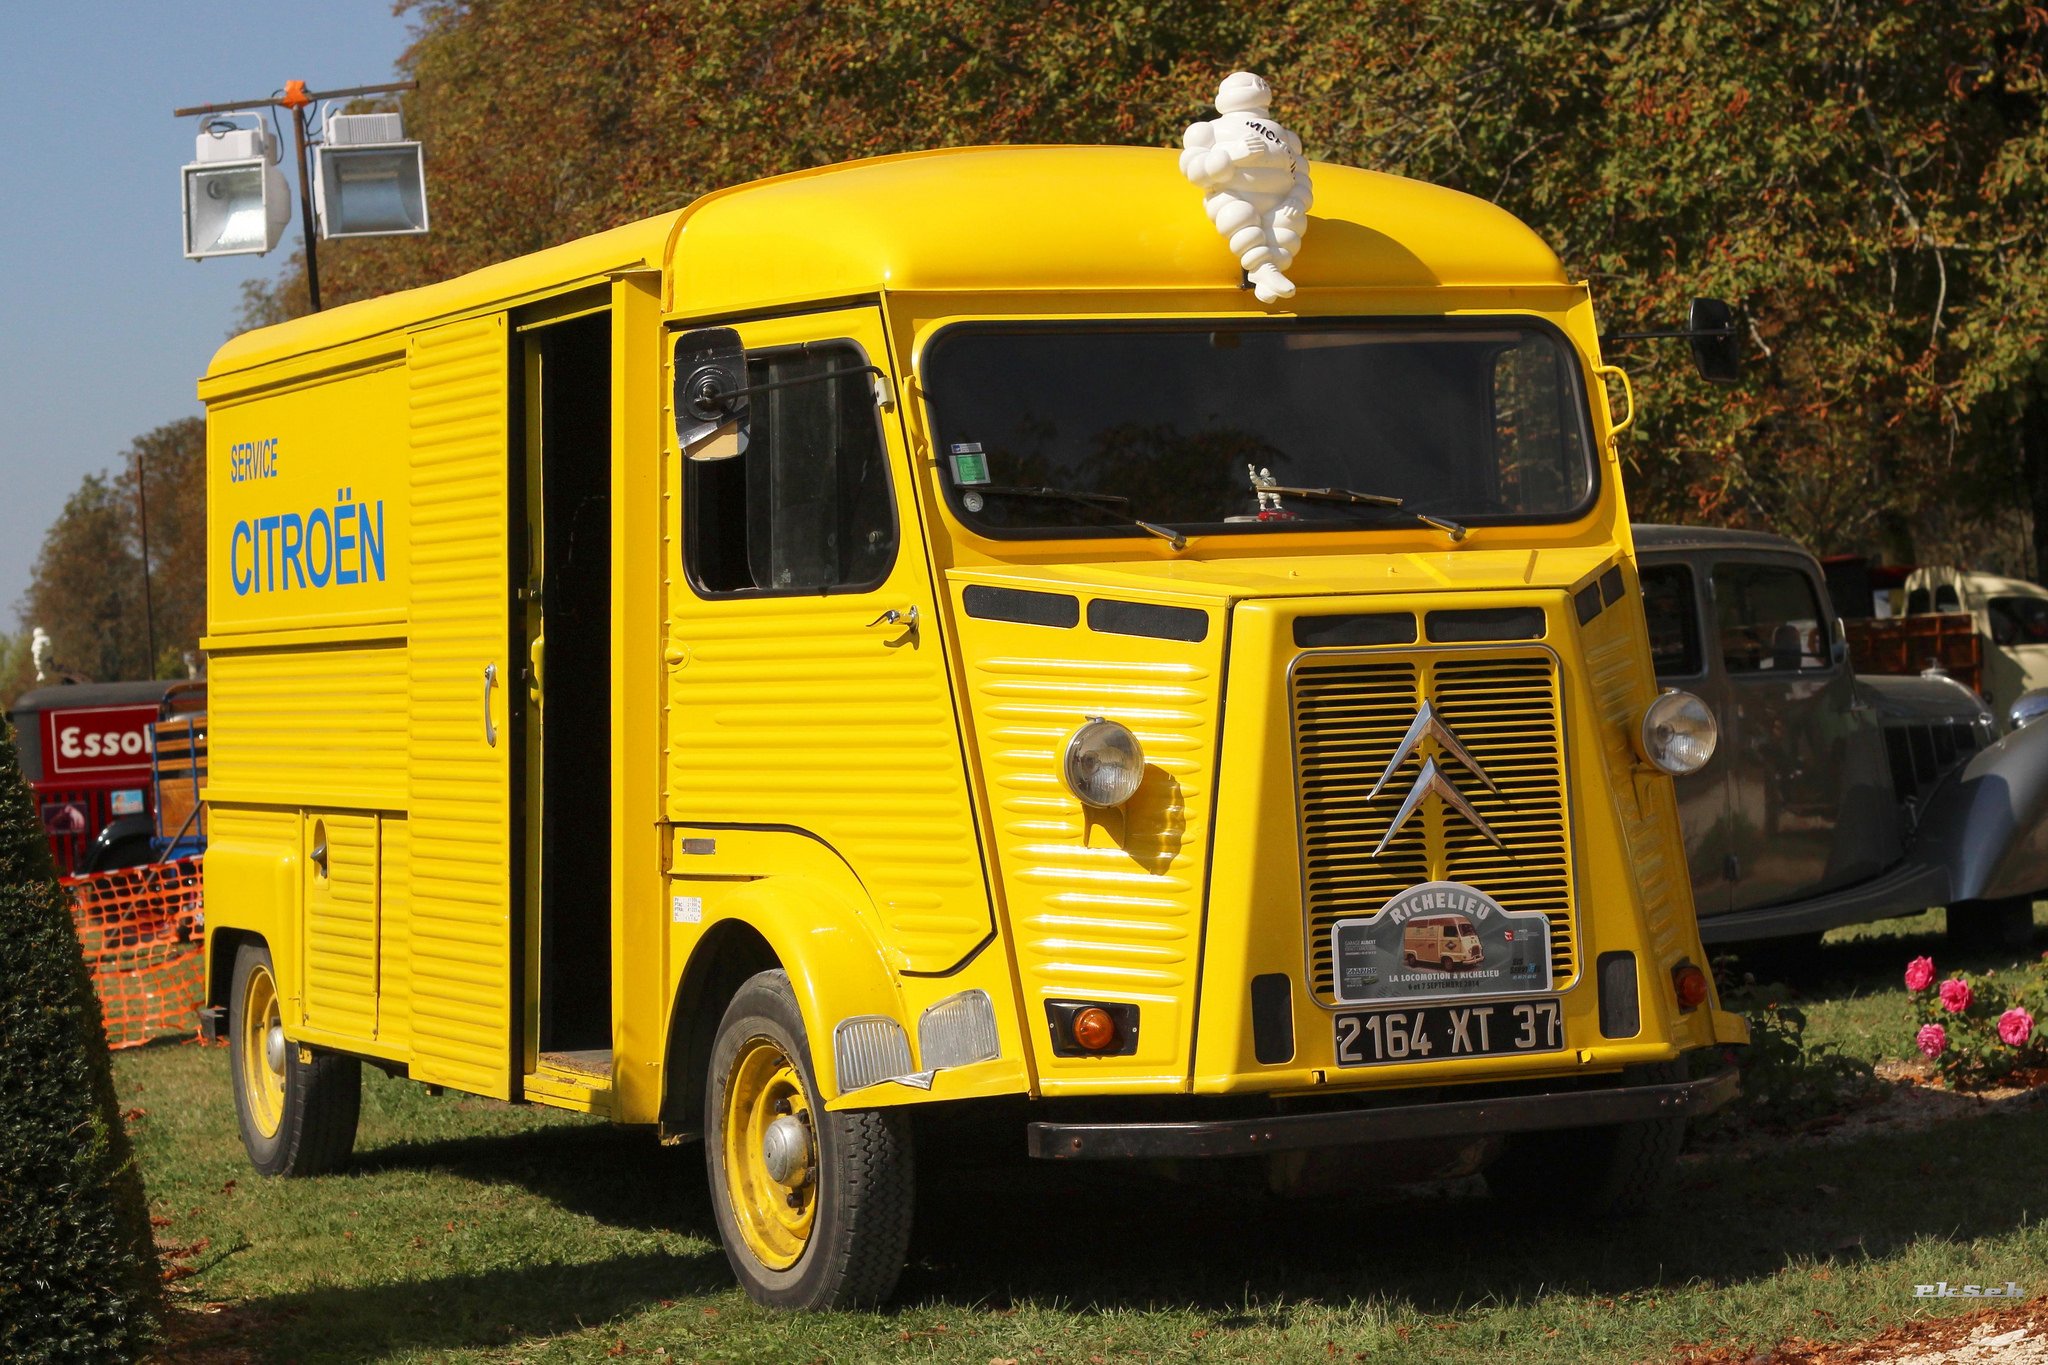 citroen, Type h, Classic, Cars, French, Fourgonnette, Truck, Van, Food